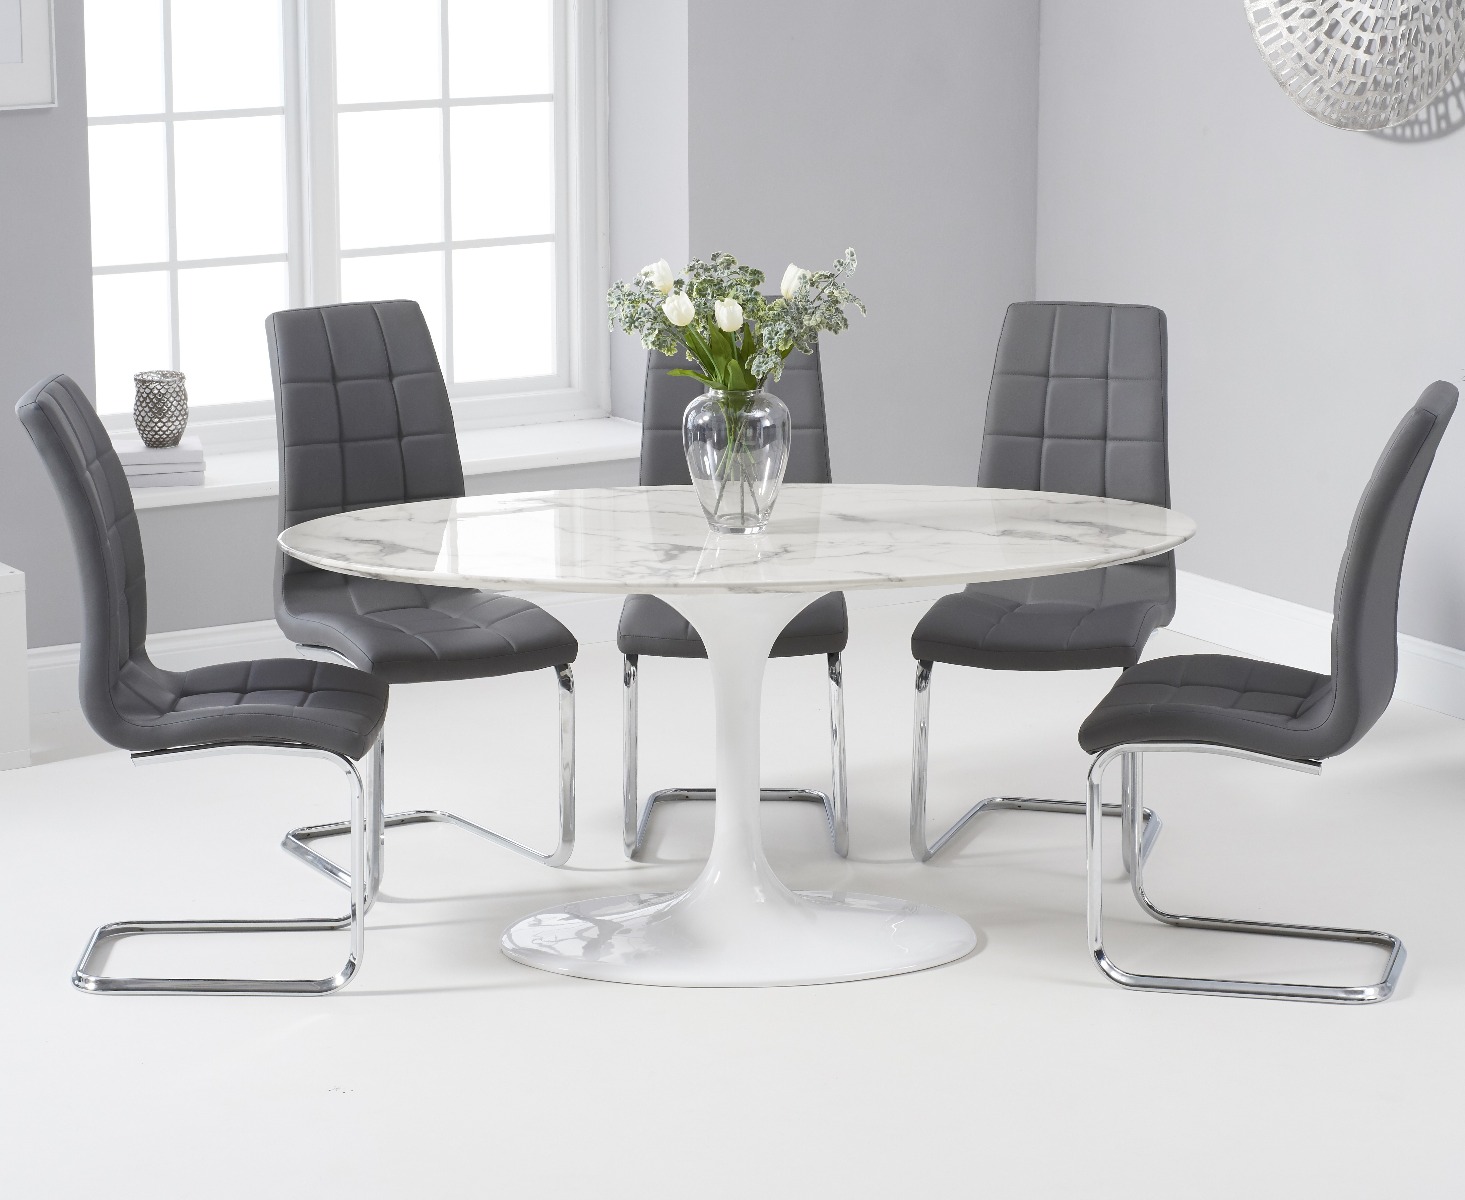 Brighton 160cm Oval White Marble Dining Table With 6 Black Vigo Dining Chairs